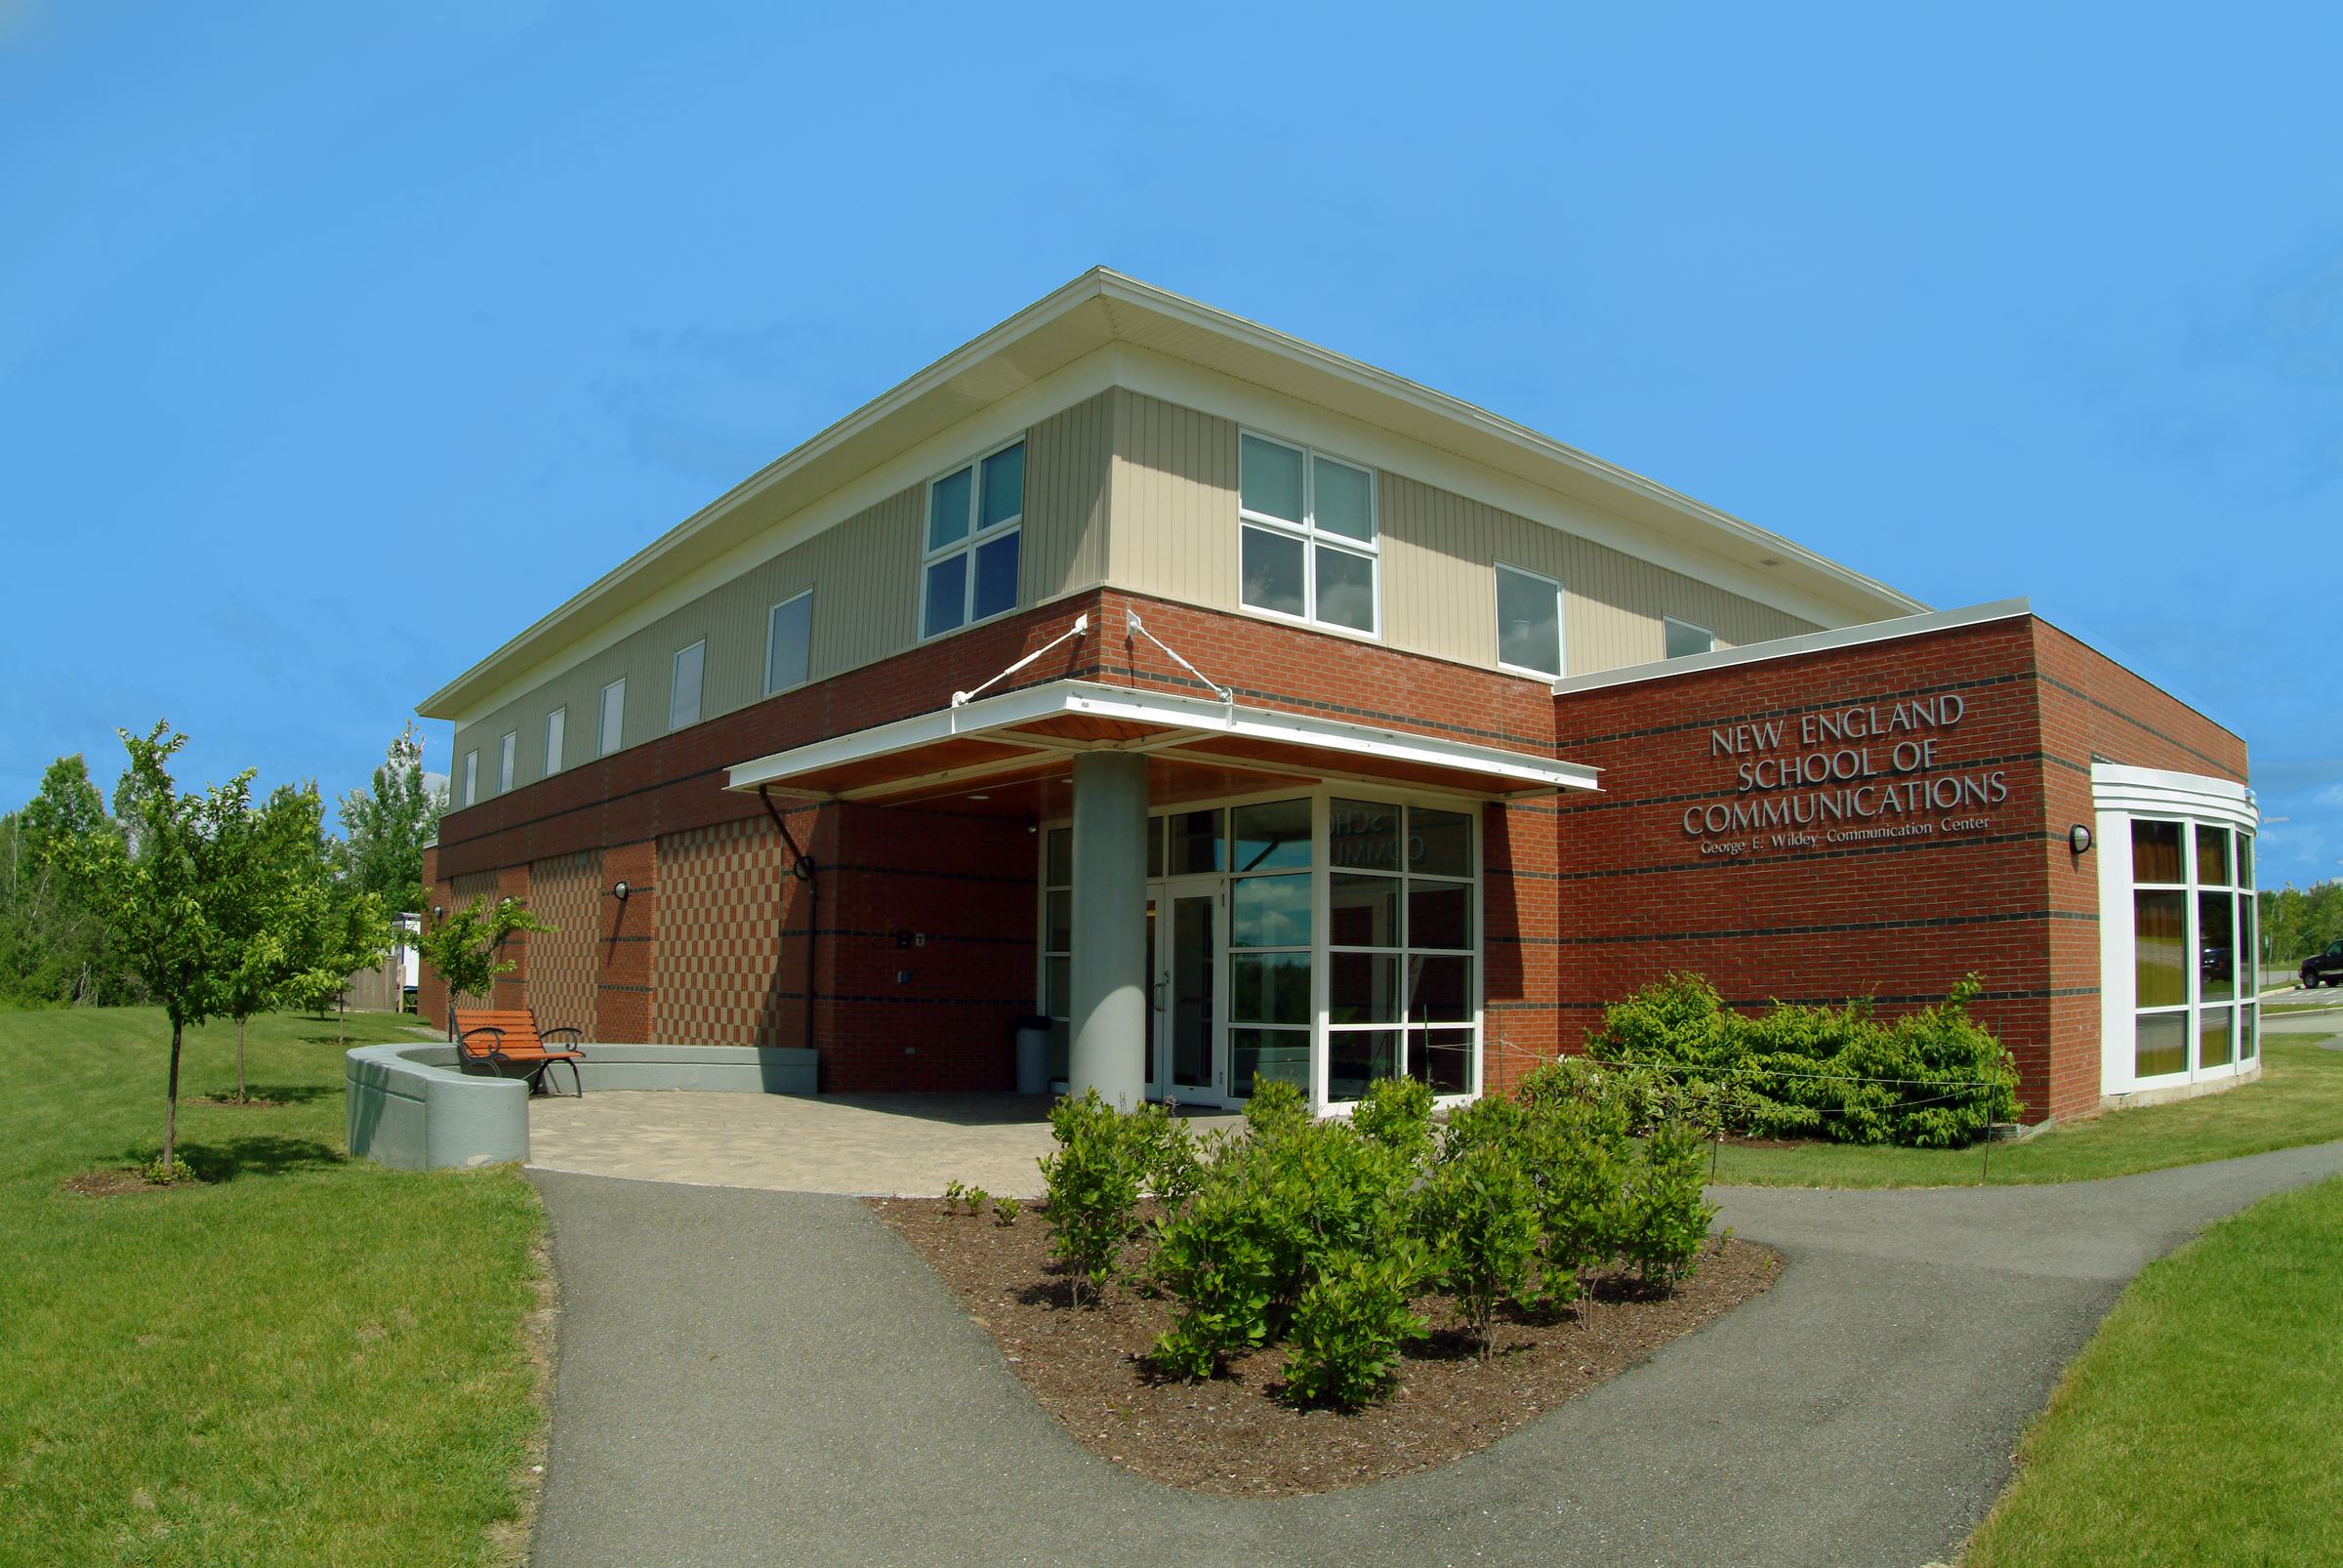 The Wildey Communication Center is the home of Husson University's New England School of Communications.